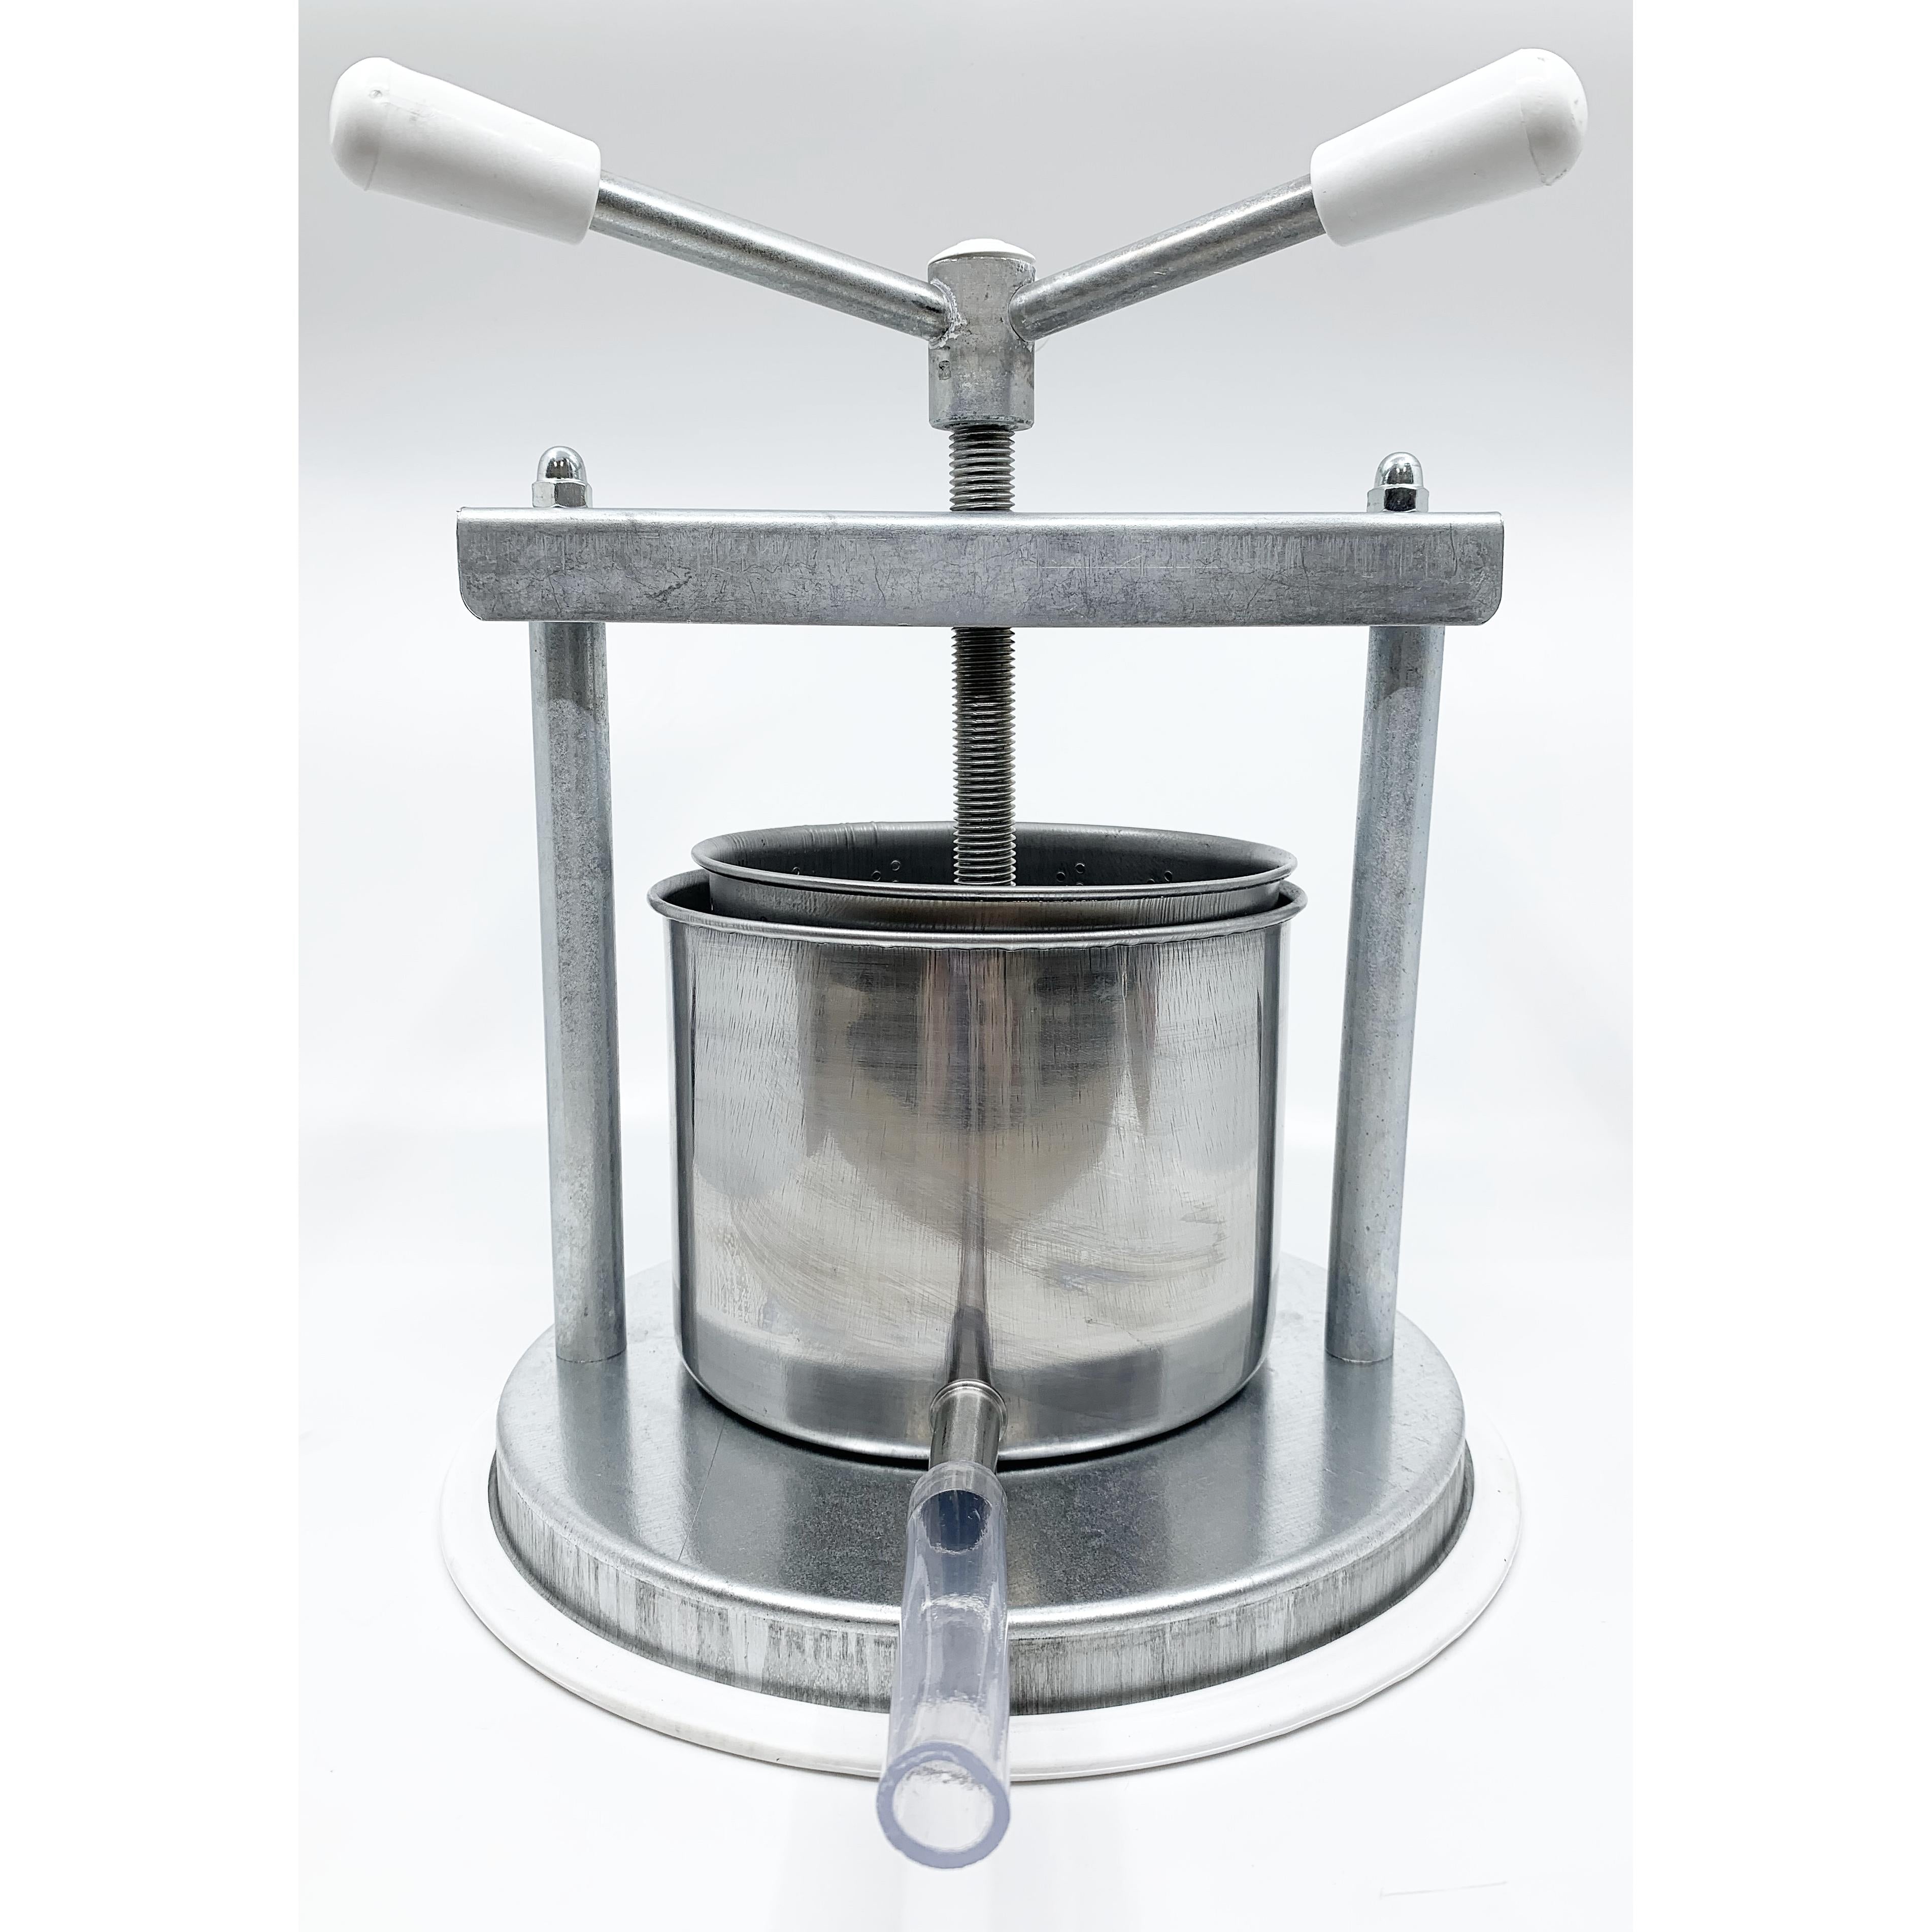 Medium Professional Galvanized Vegetable / Fruit Press 6" - 2.5 Litre Torchietto - Made in Italy for Pressing Fruits, Vegetables, Berries and Tinctures with Spout 